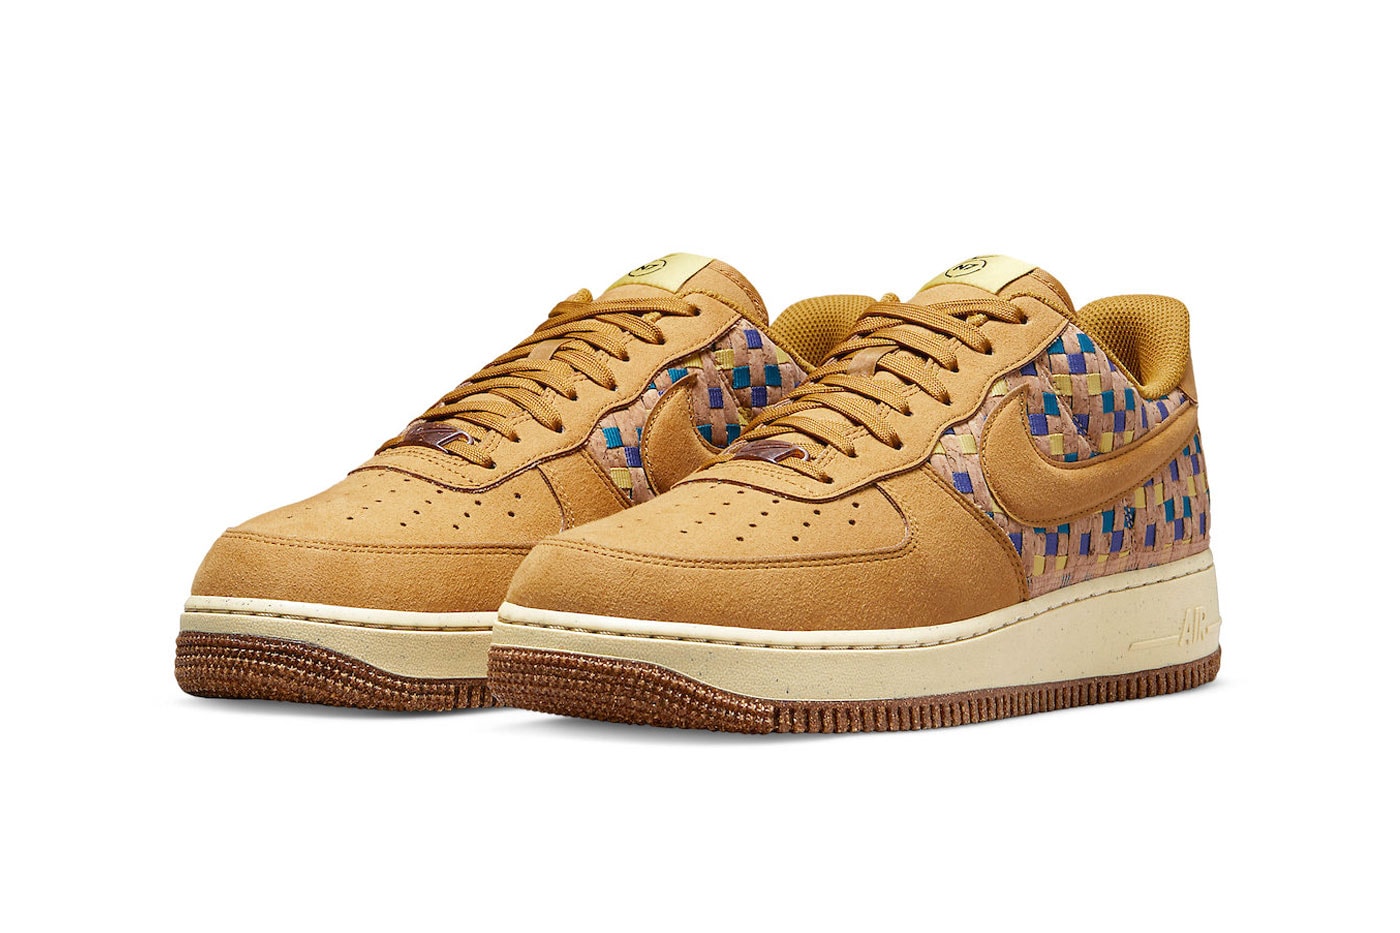 Here Are the Official Images of the Nike Air Force 1 N7 "Woven Cork" DM4956-700 nike air force 1 low shows footwear sneakers af1s af1 